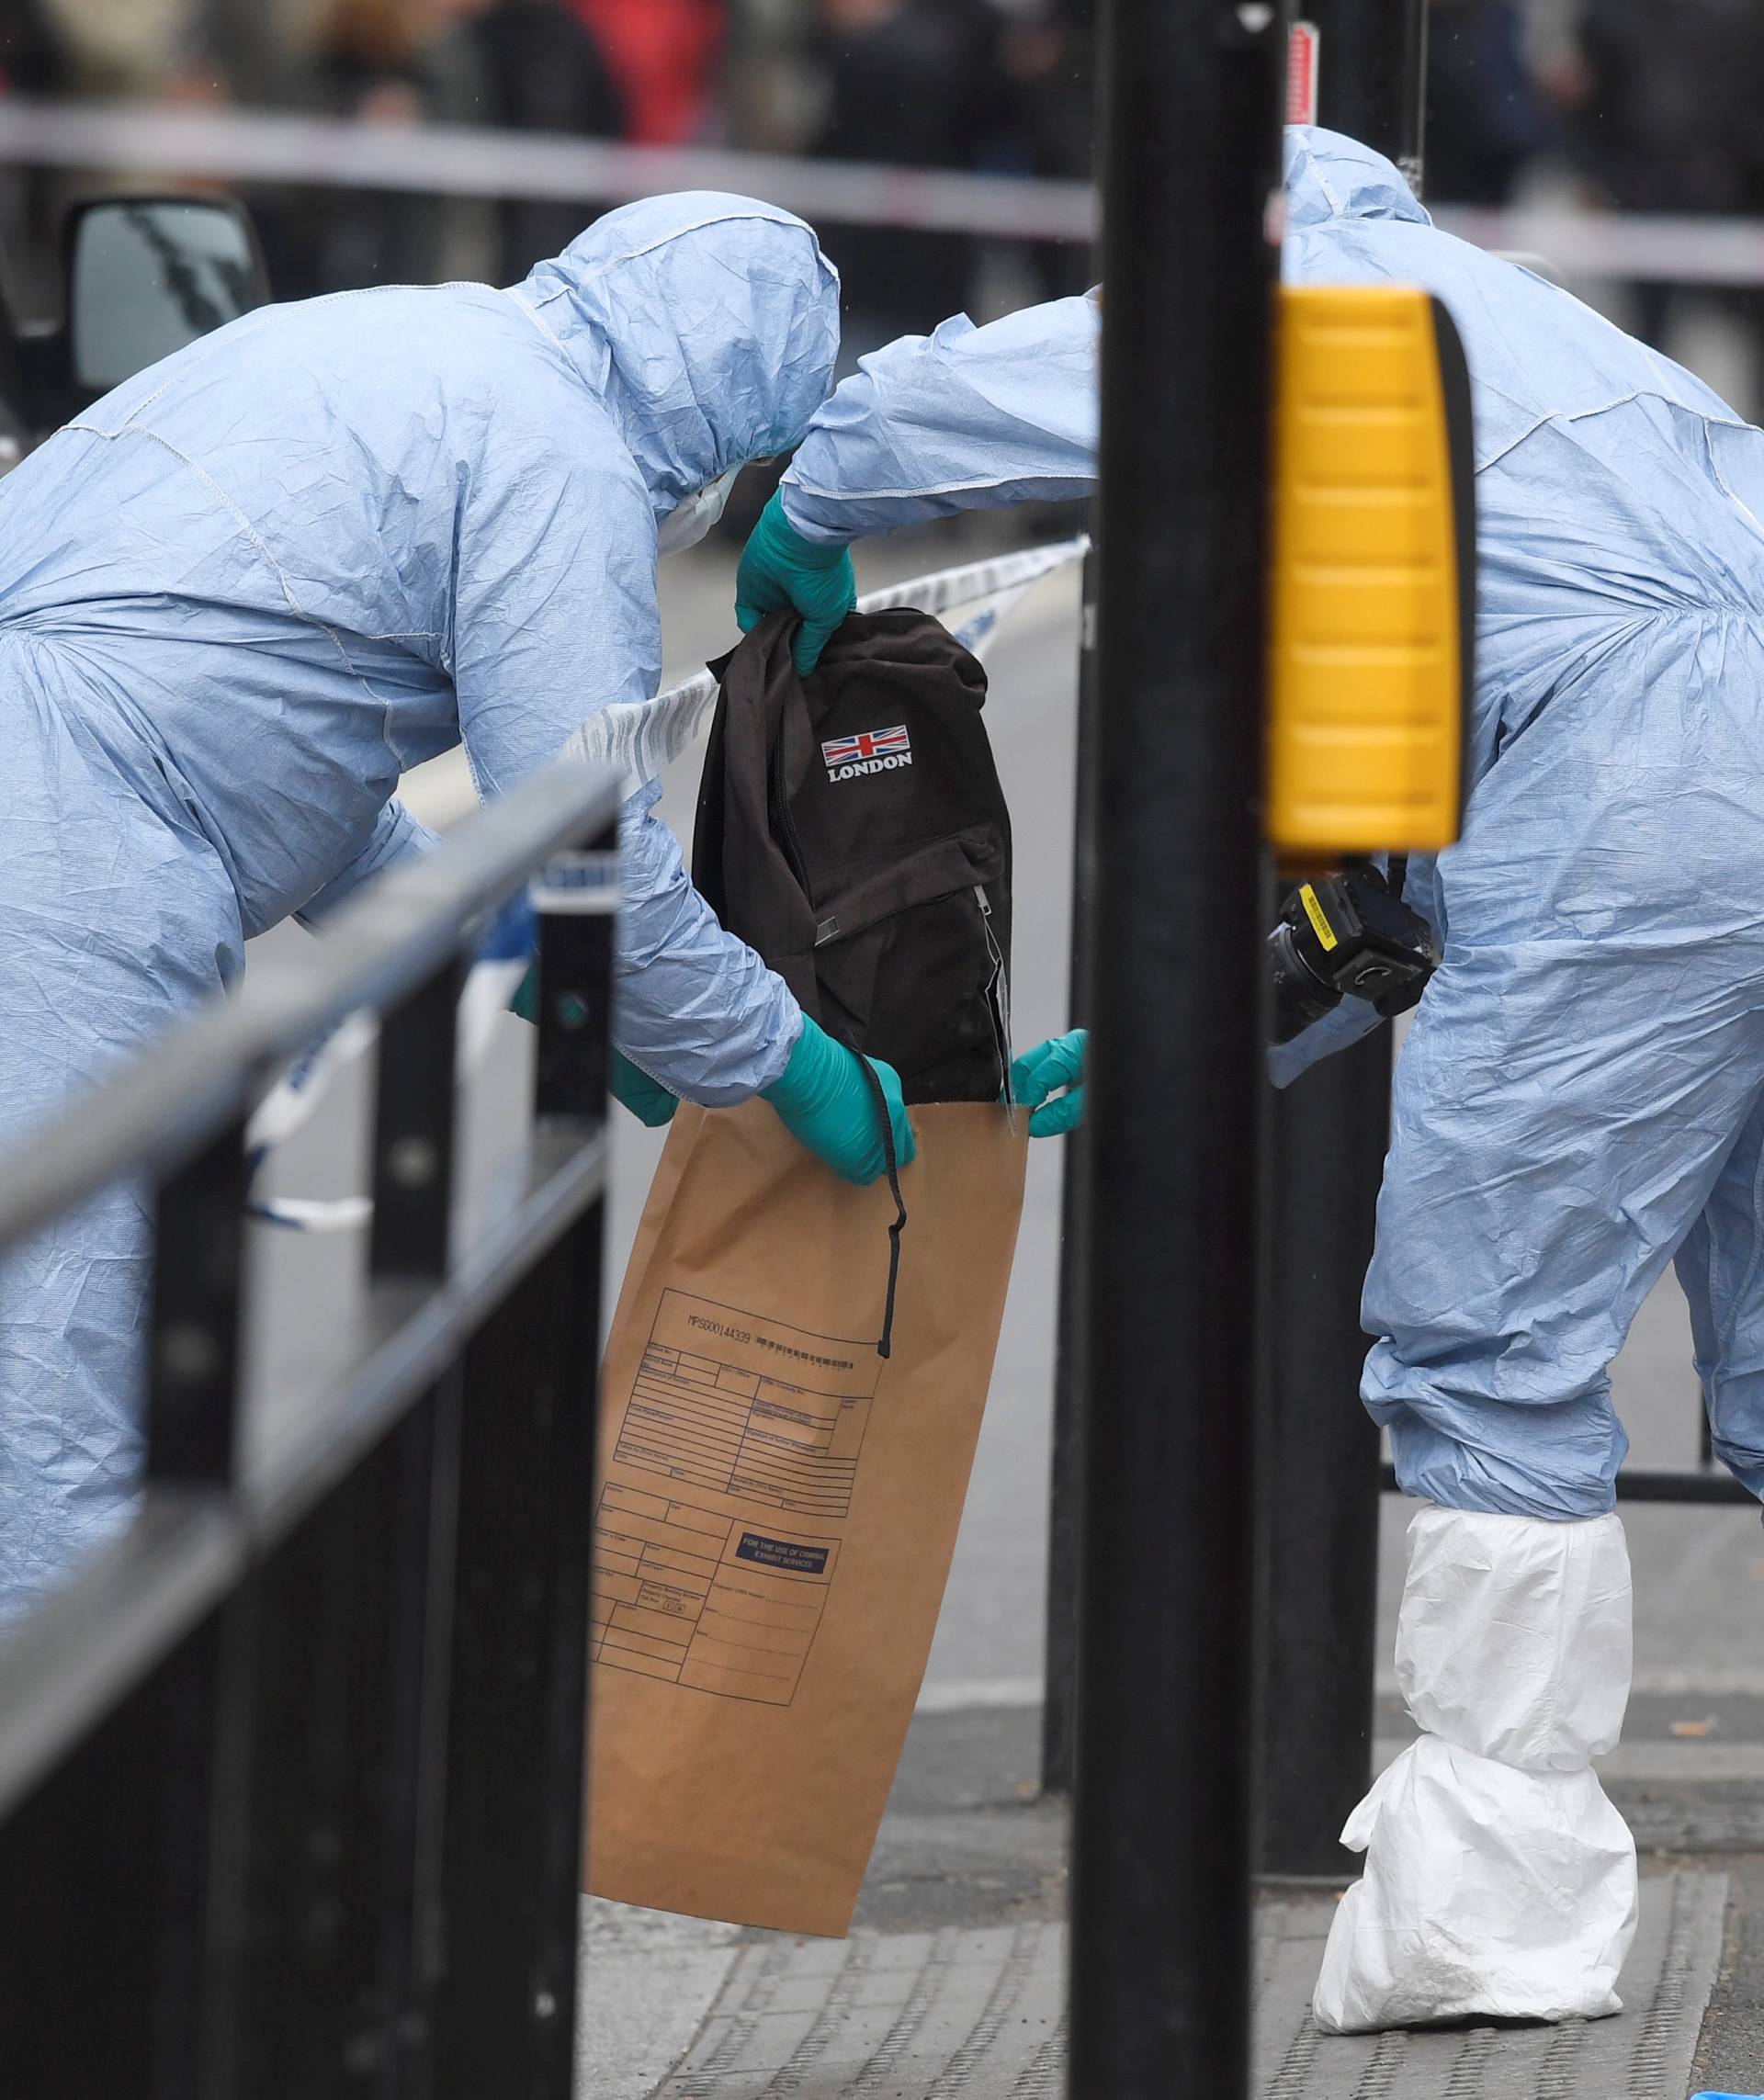 Forensic investigators recover a rucksack after man was arrested on Whitehall in Westminster in central London